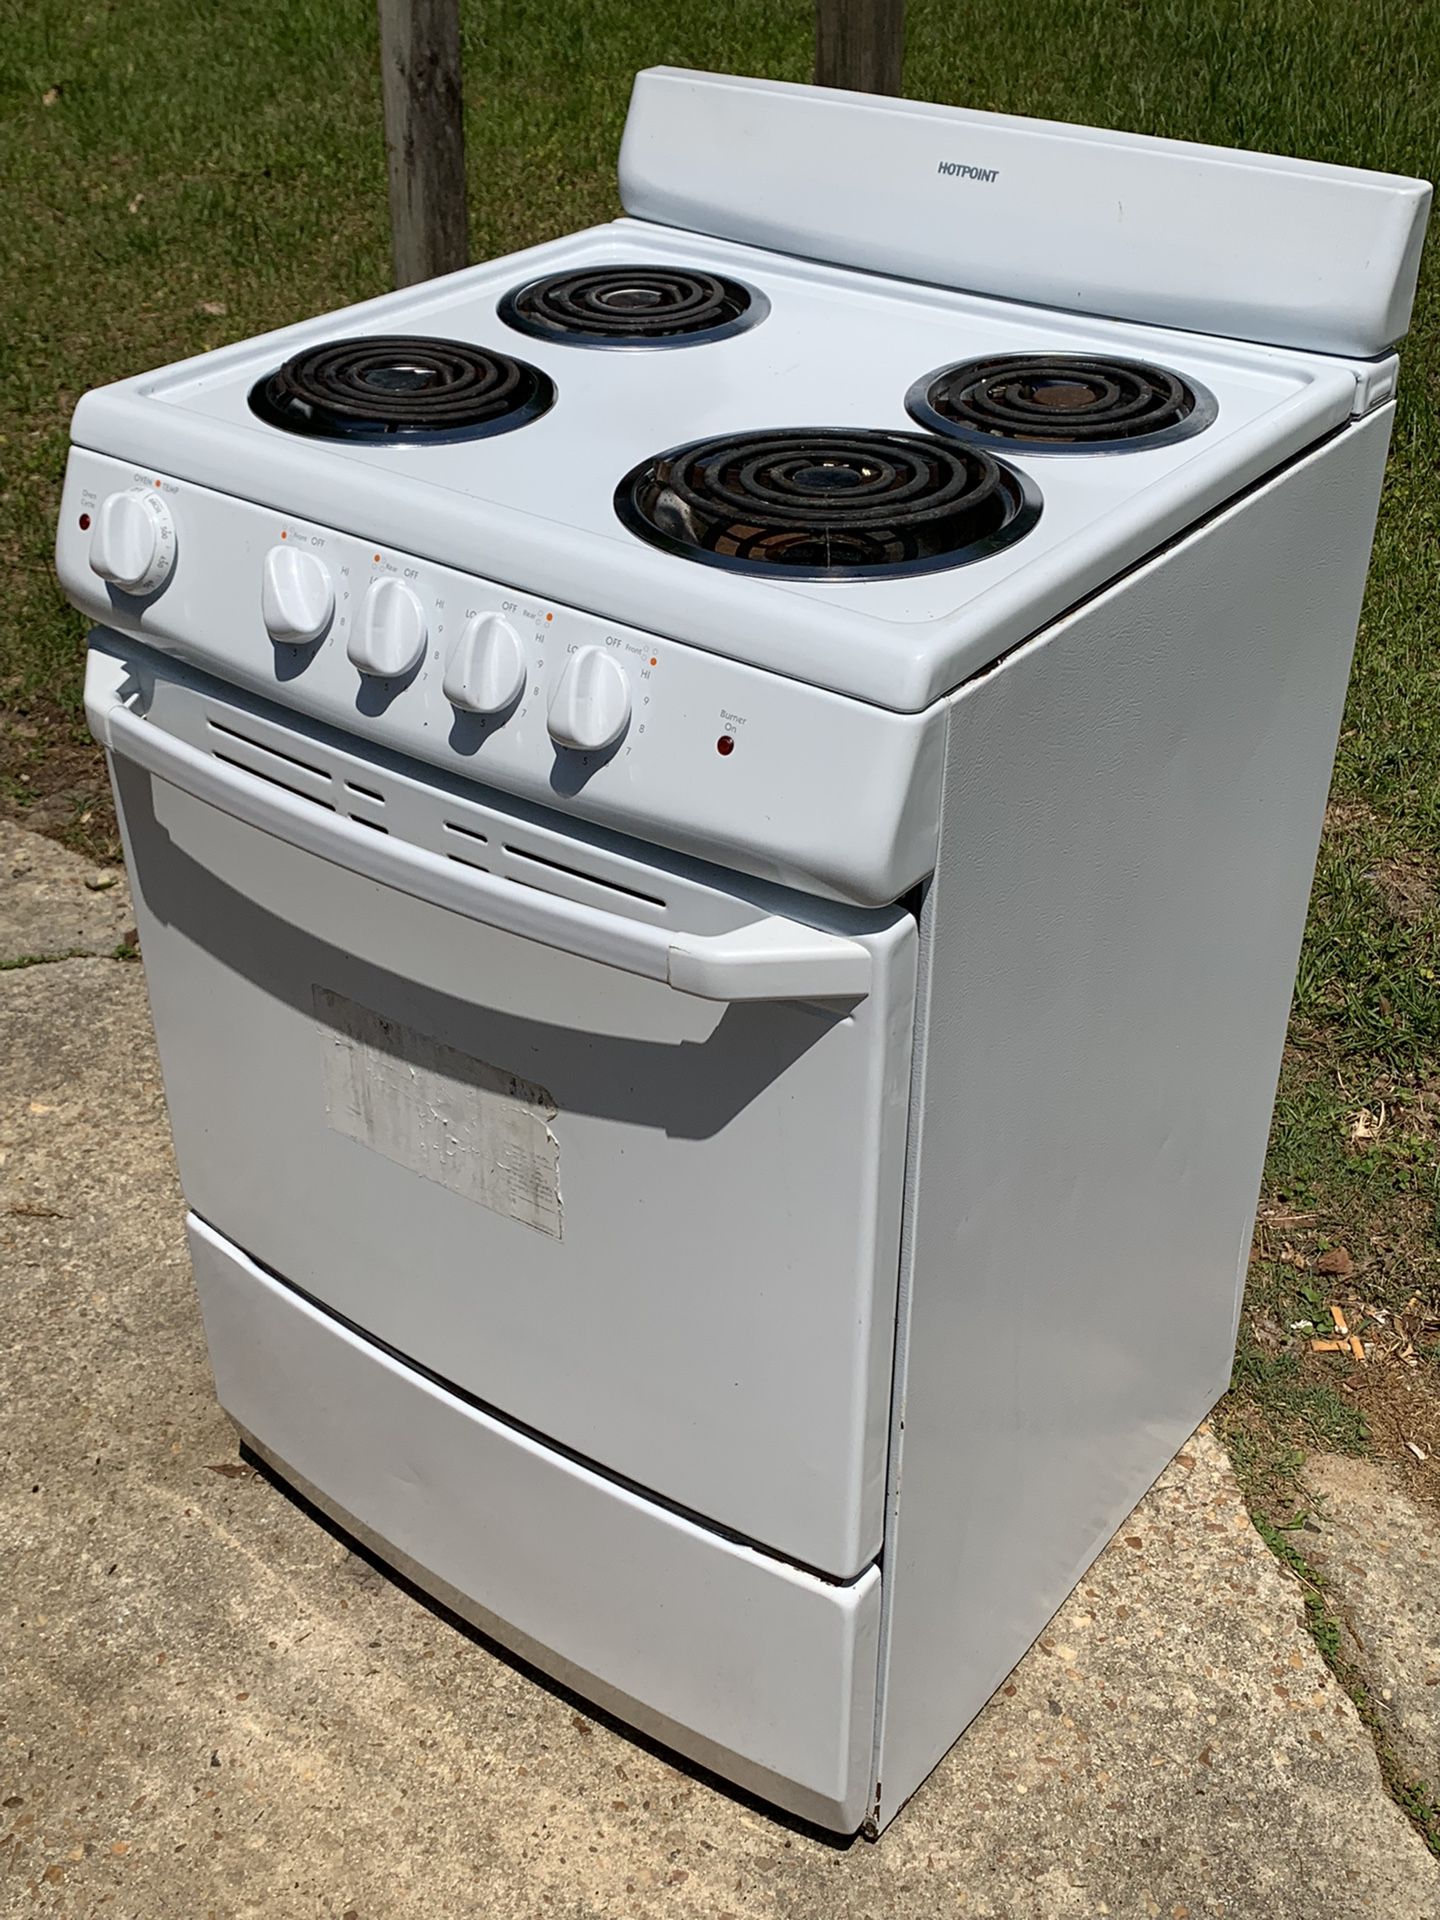 24 inch electric stove